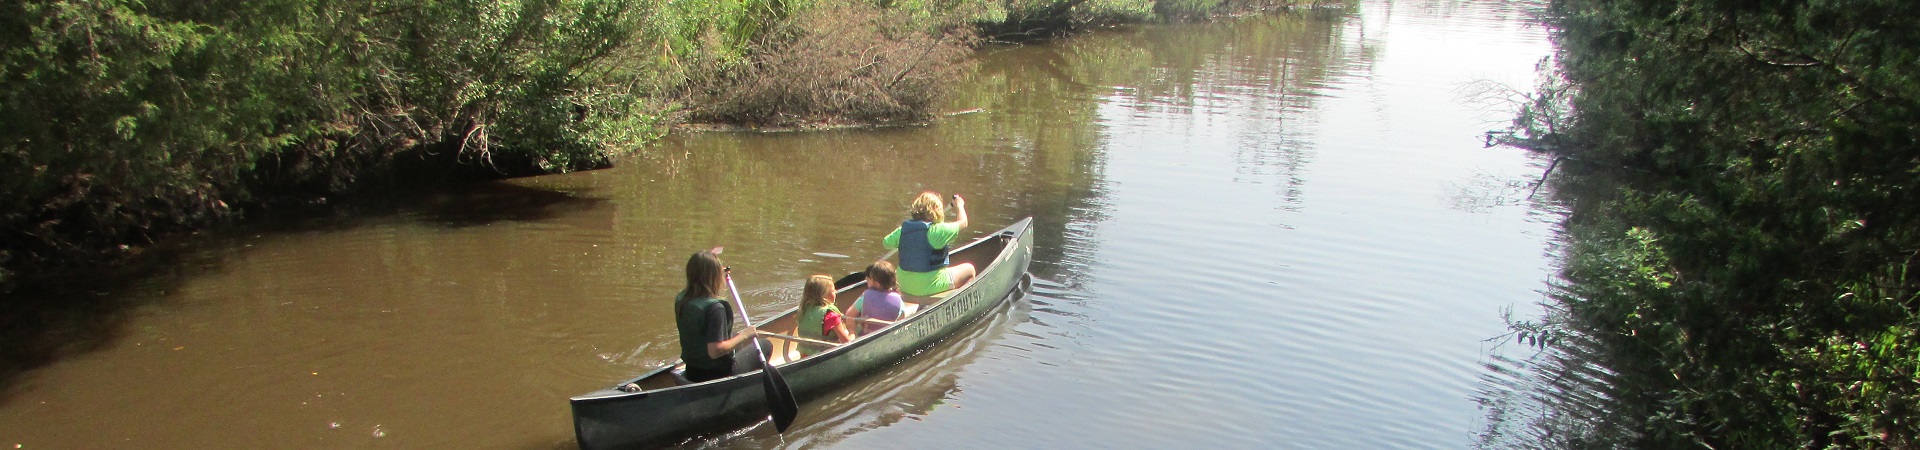  Girl Scouts canoeing in The Outback 